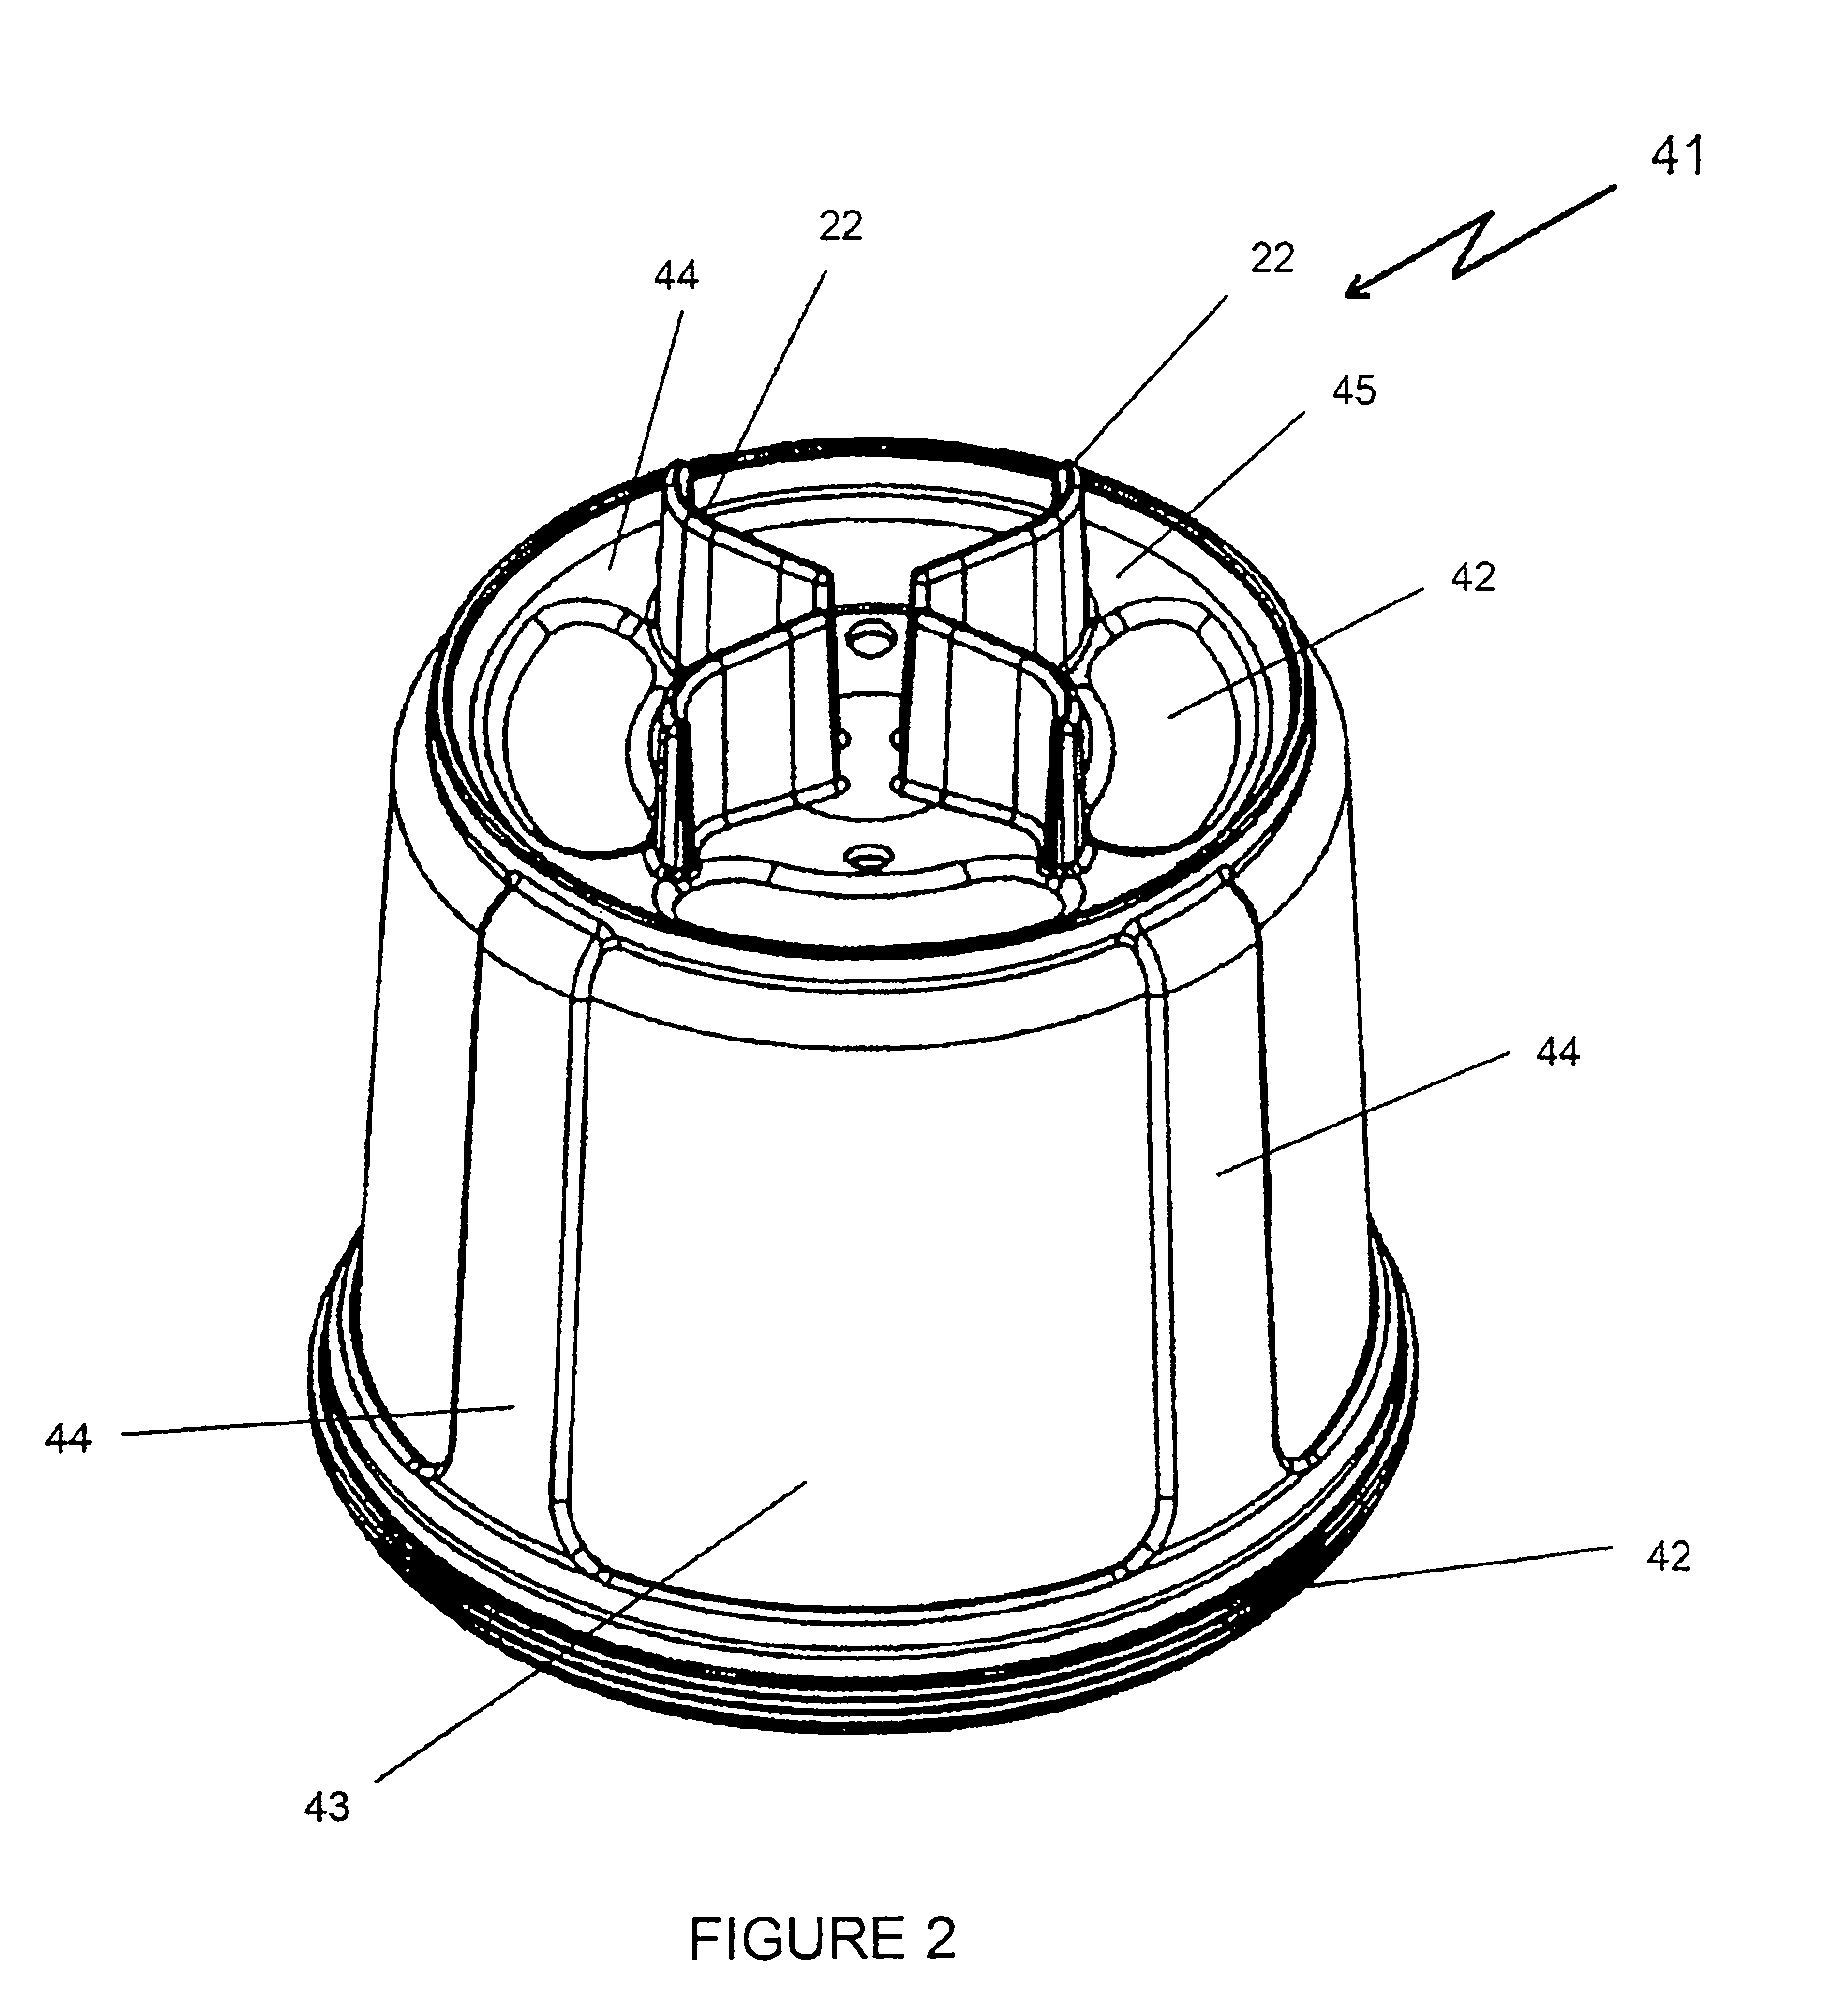 Apparatus for Extracting Cold-Brewed Coffee Concentrate